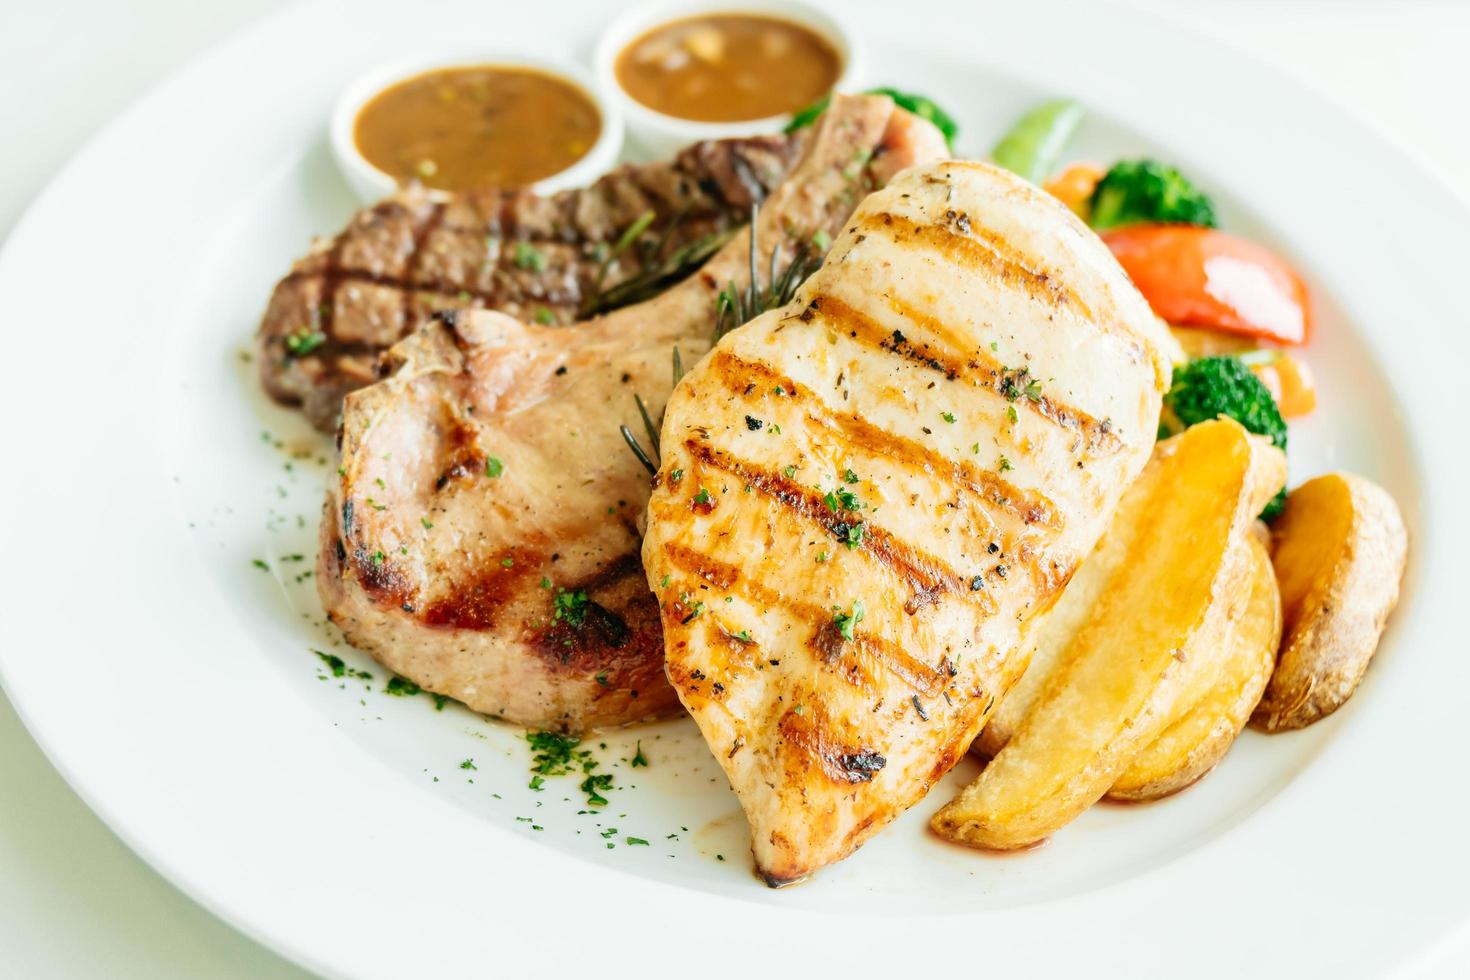 Chicken breast and Pork chop with beef meat steak and vegetable photo